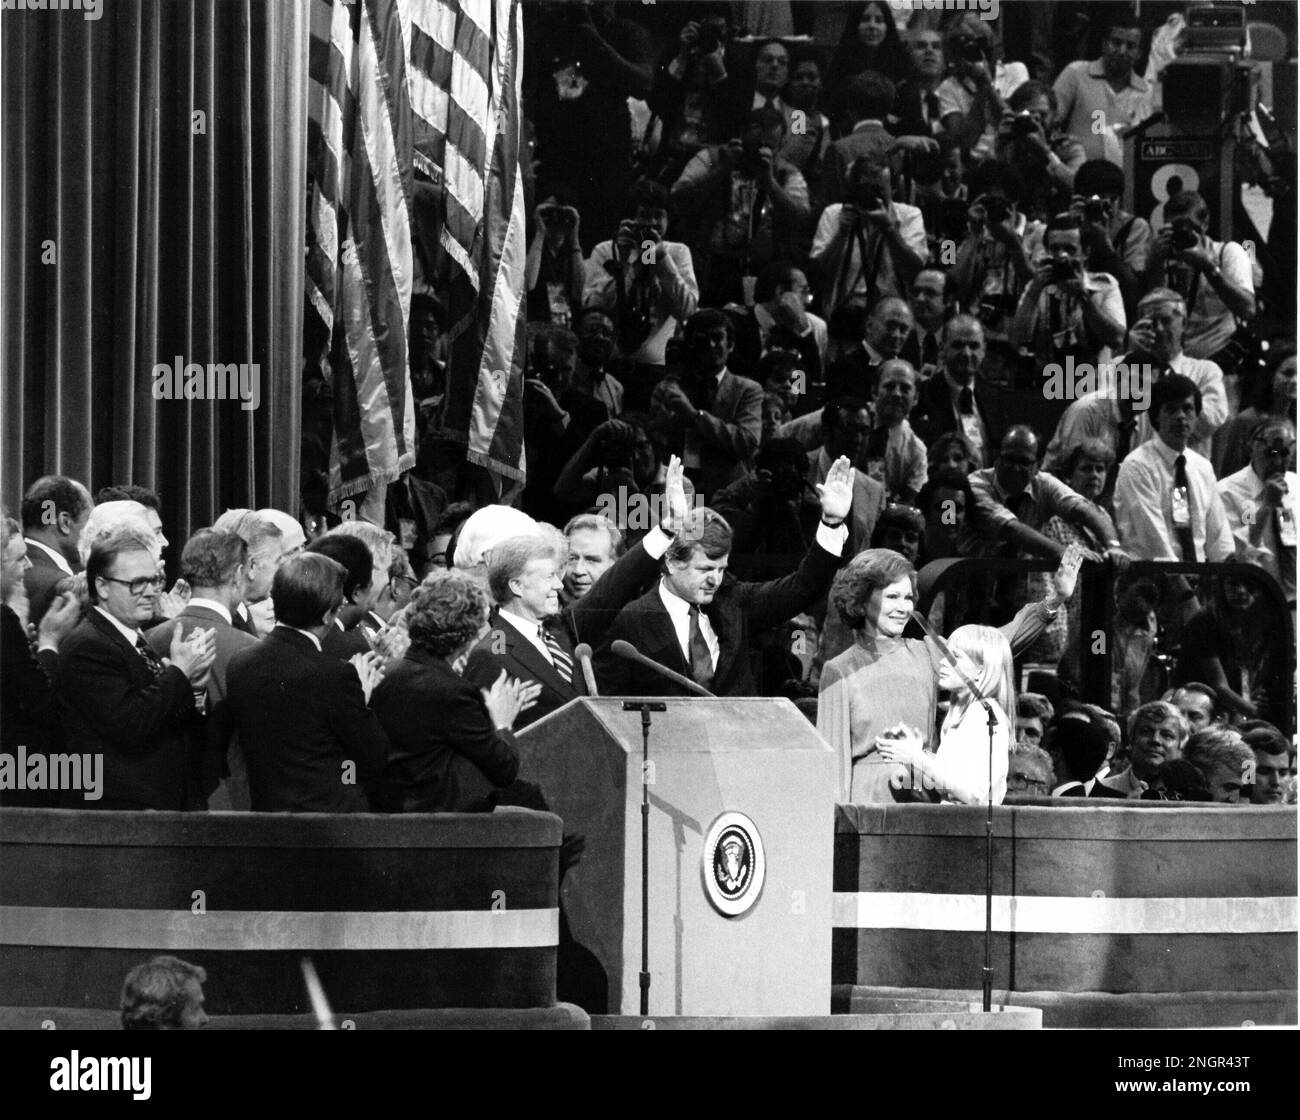 New York, NY - (FILE) -- United States President Jimmy Carter, U.S. Senator Edward M. 'Ted' Kennedy (Democrat of Massachusetts), first lady Roslyn Carter, and Amy Carter, join a host of Democratic Party officials on the podium on the last night of the 1980 Democratic National Convention in New York, New York on Thursday, August 14, 1980 in a show of unity after a bruising battle for the party's nomination for President.Credit: Arnie Sachs/CNP Stock Photo